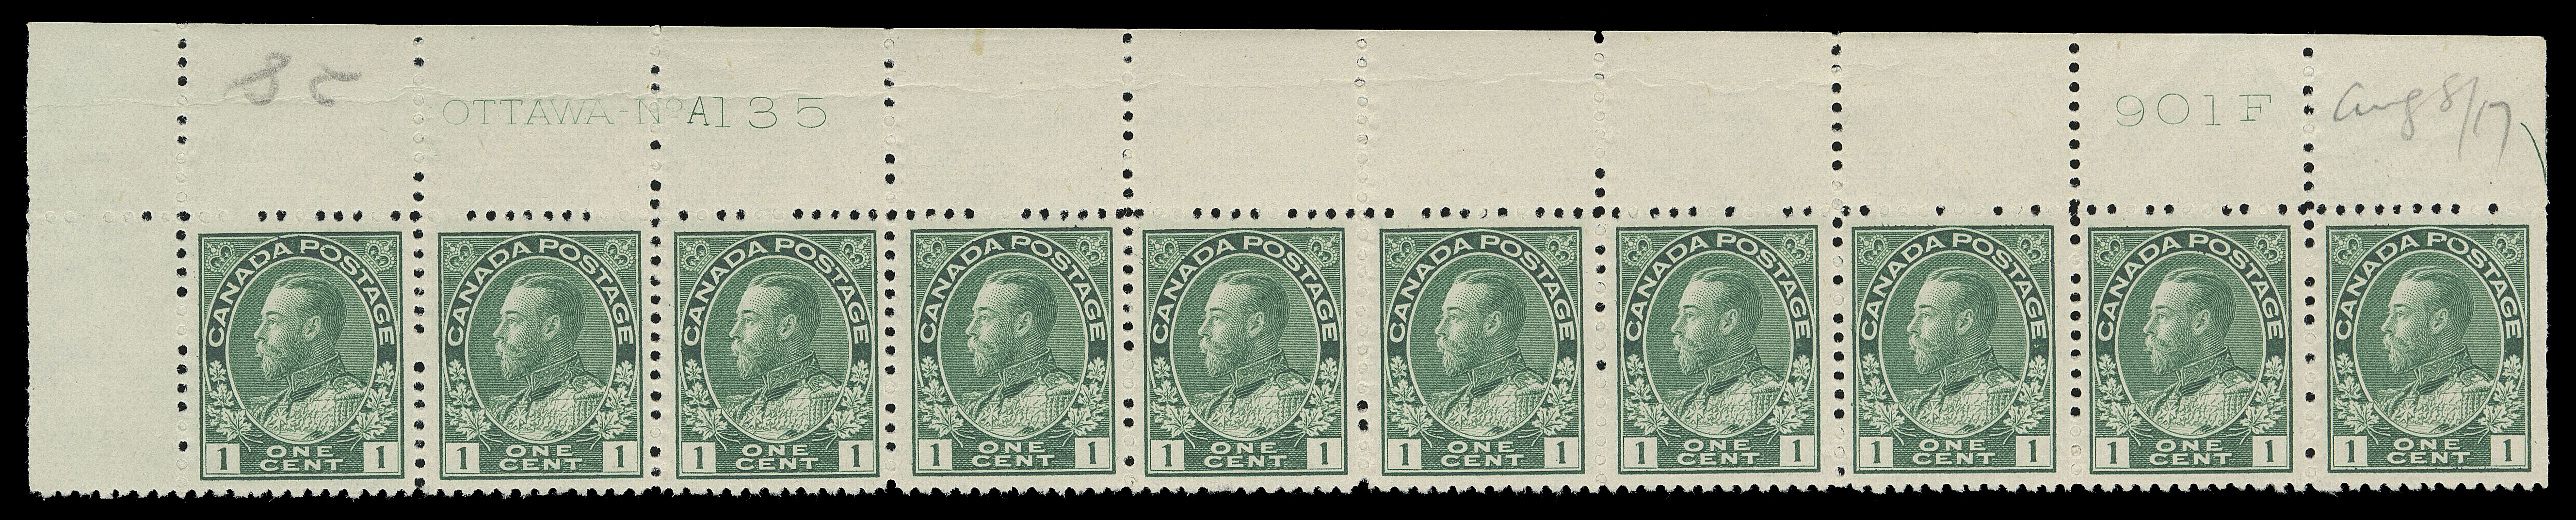 ADMIRAL STAMPS  104e,A brilliant fresh, well centered UL Plate 135 strip of ten, LH in selvedge only, stamps NH; pencil "Aug 8 / 17" date of acquisition, VF (Unitrade cat. $1,200)